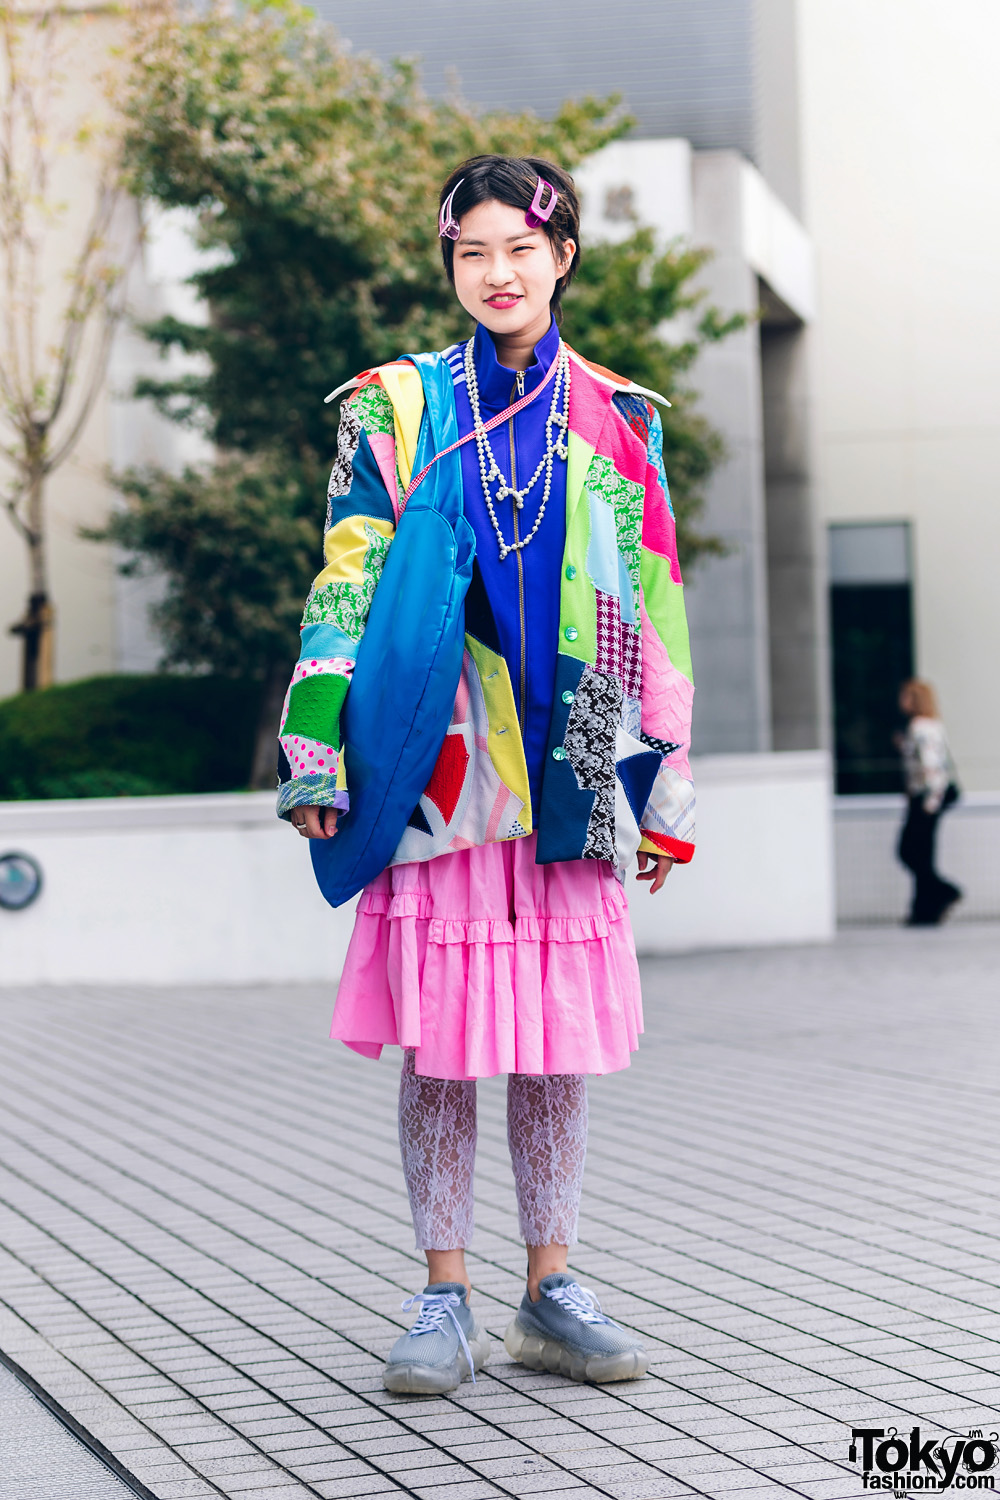 Colorful Bunka College Street Style w/ Pixie Cut & Oversized Hair Clips, Patchwork Jacket, Skirt Over Tights, Heart-Shaped Tote & Sneakers